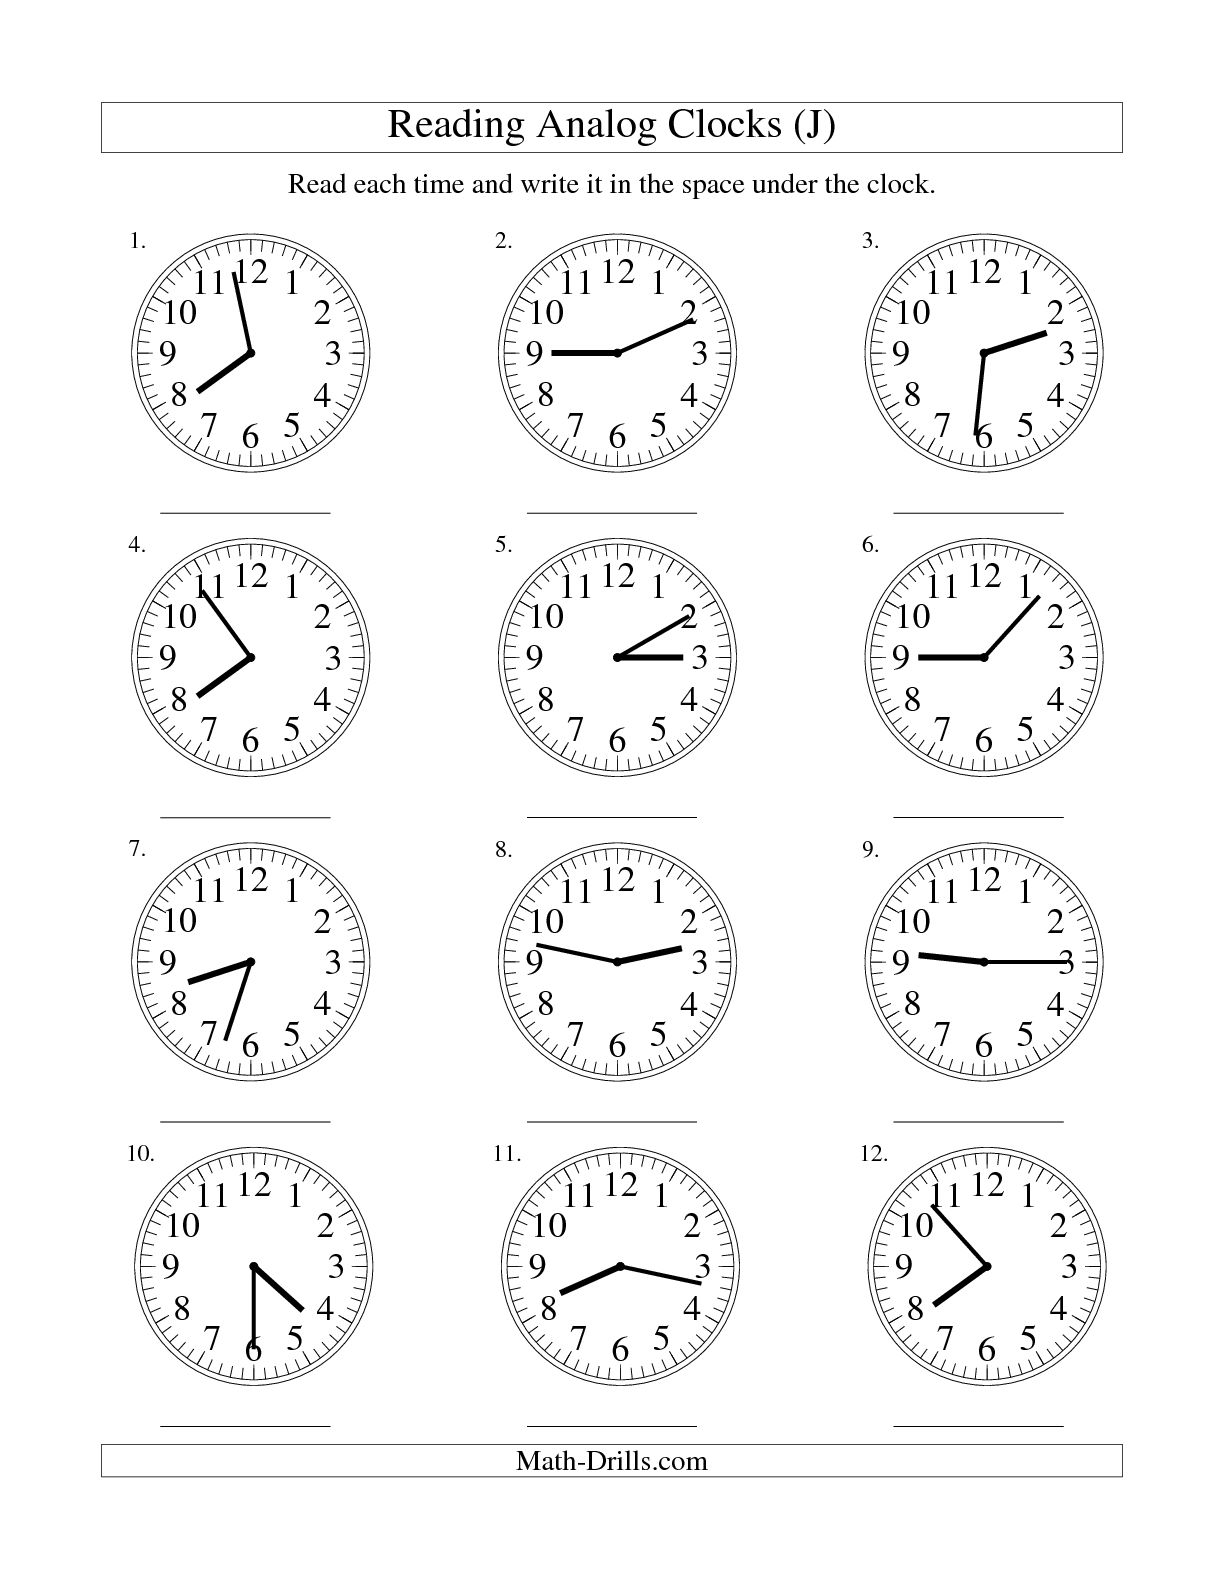 15 Best Images Of Telling Time Worksheets By 5 Minutes Telling Time Worksheets Telling Time